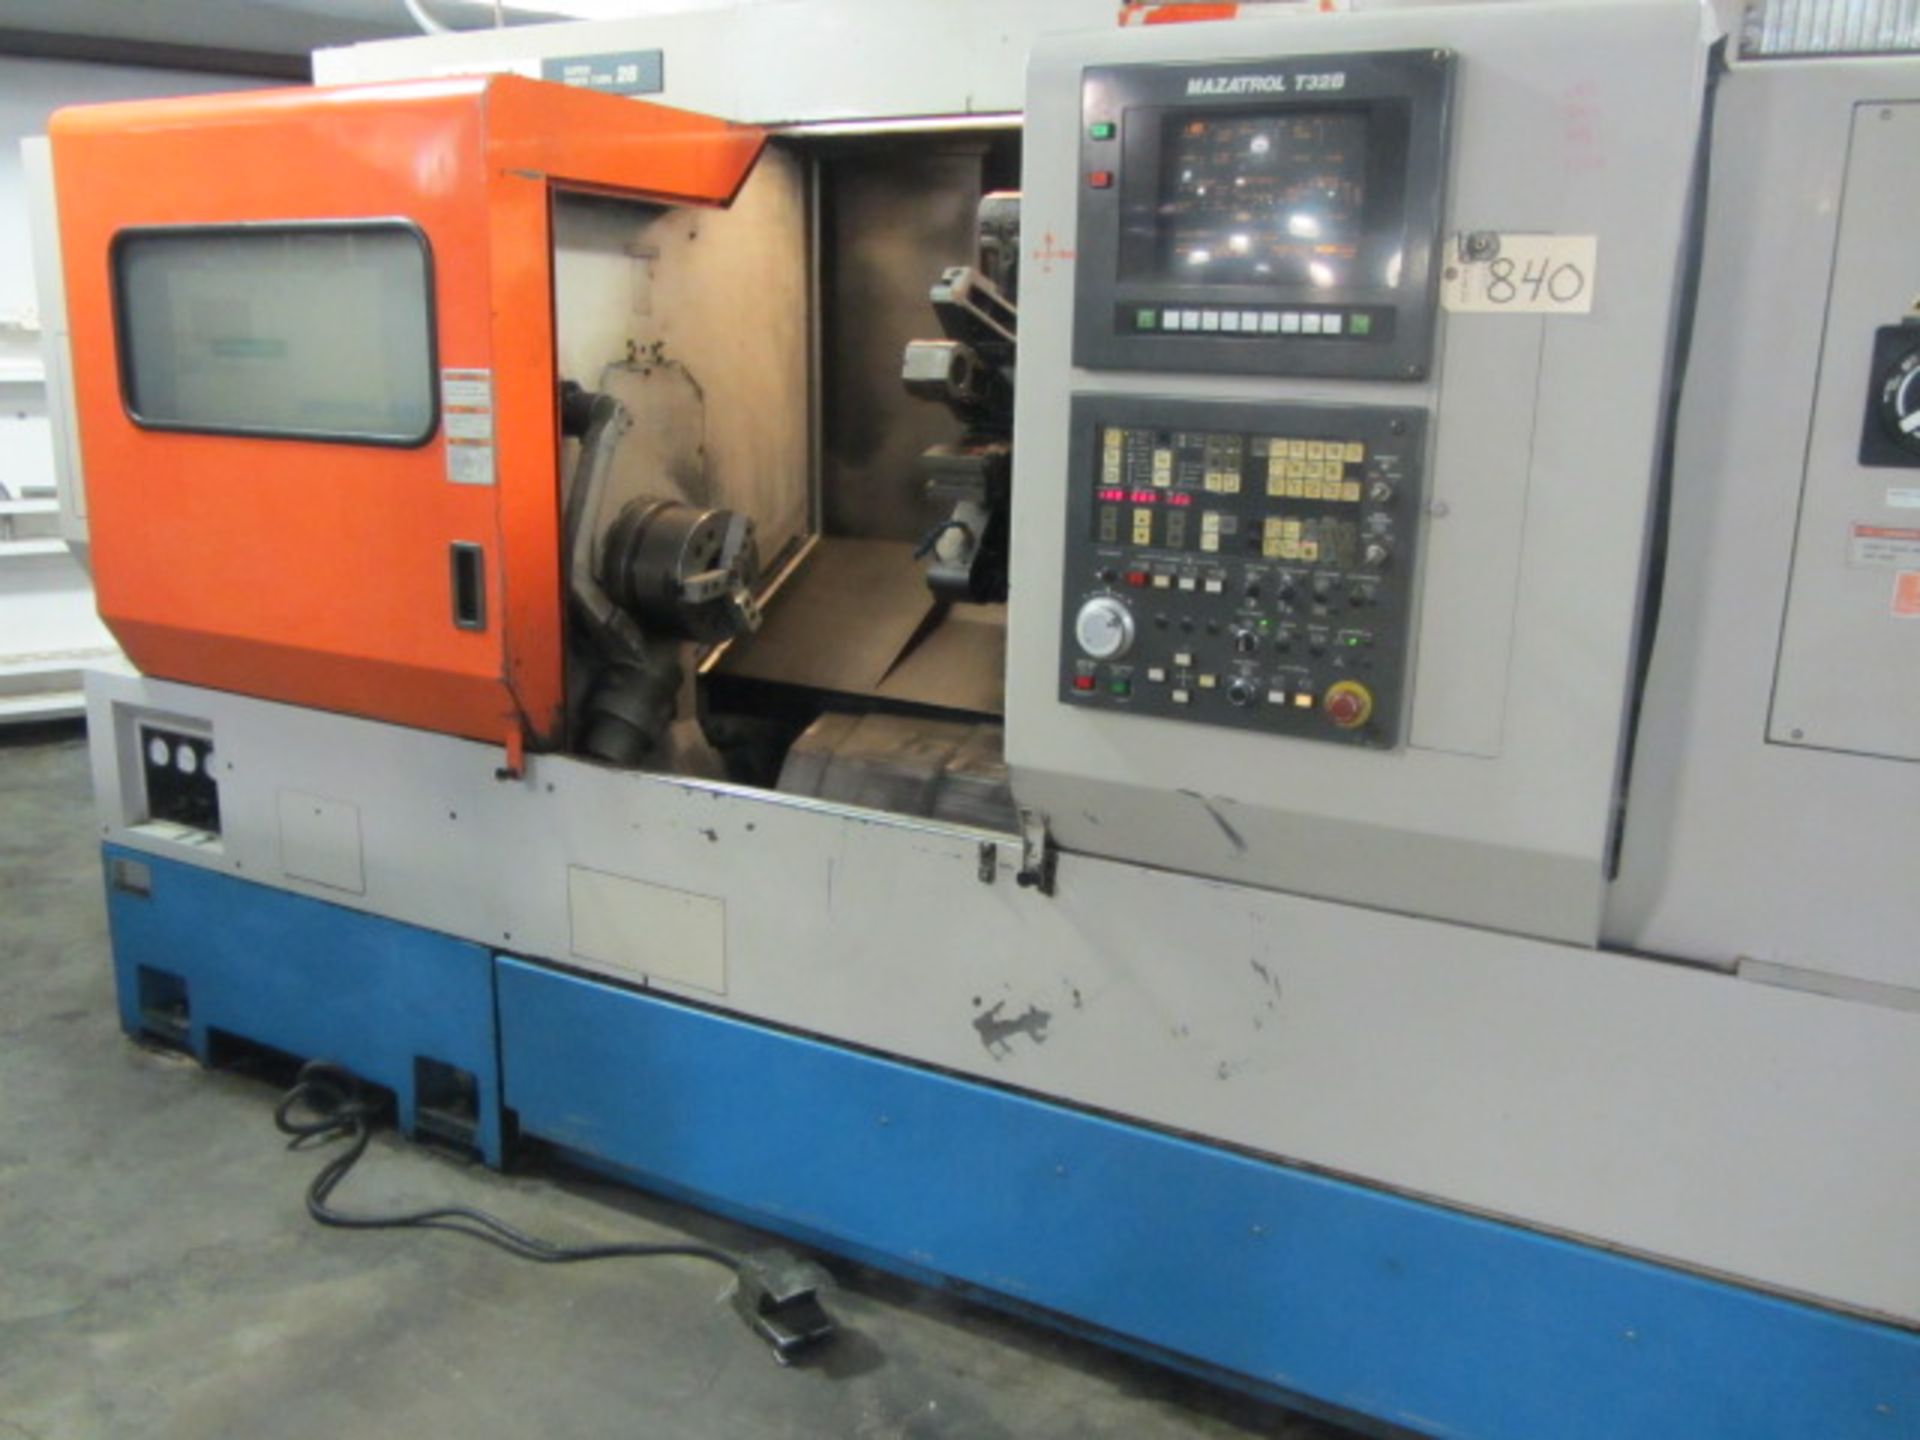 Mazak Model Super Quick Turn 28 2-Axis CNC Turning Center with 20.08'' Swing Over Bed x 40'' - Image 5 of 7